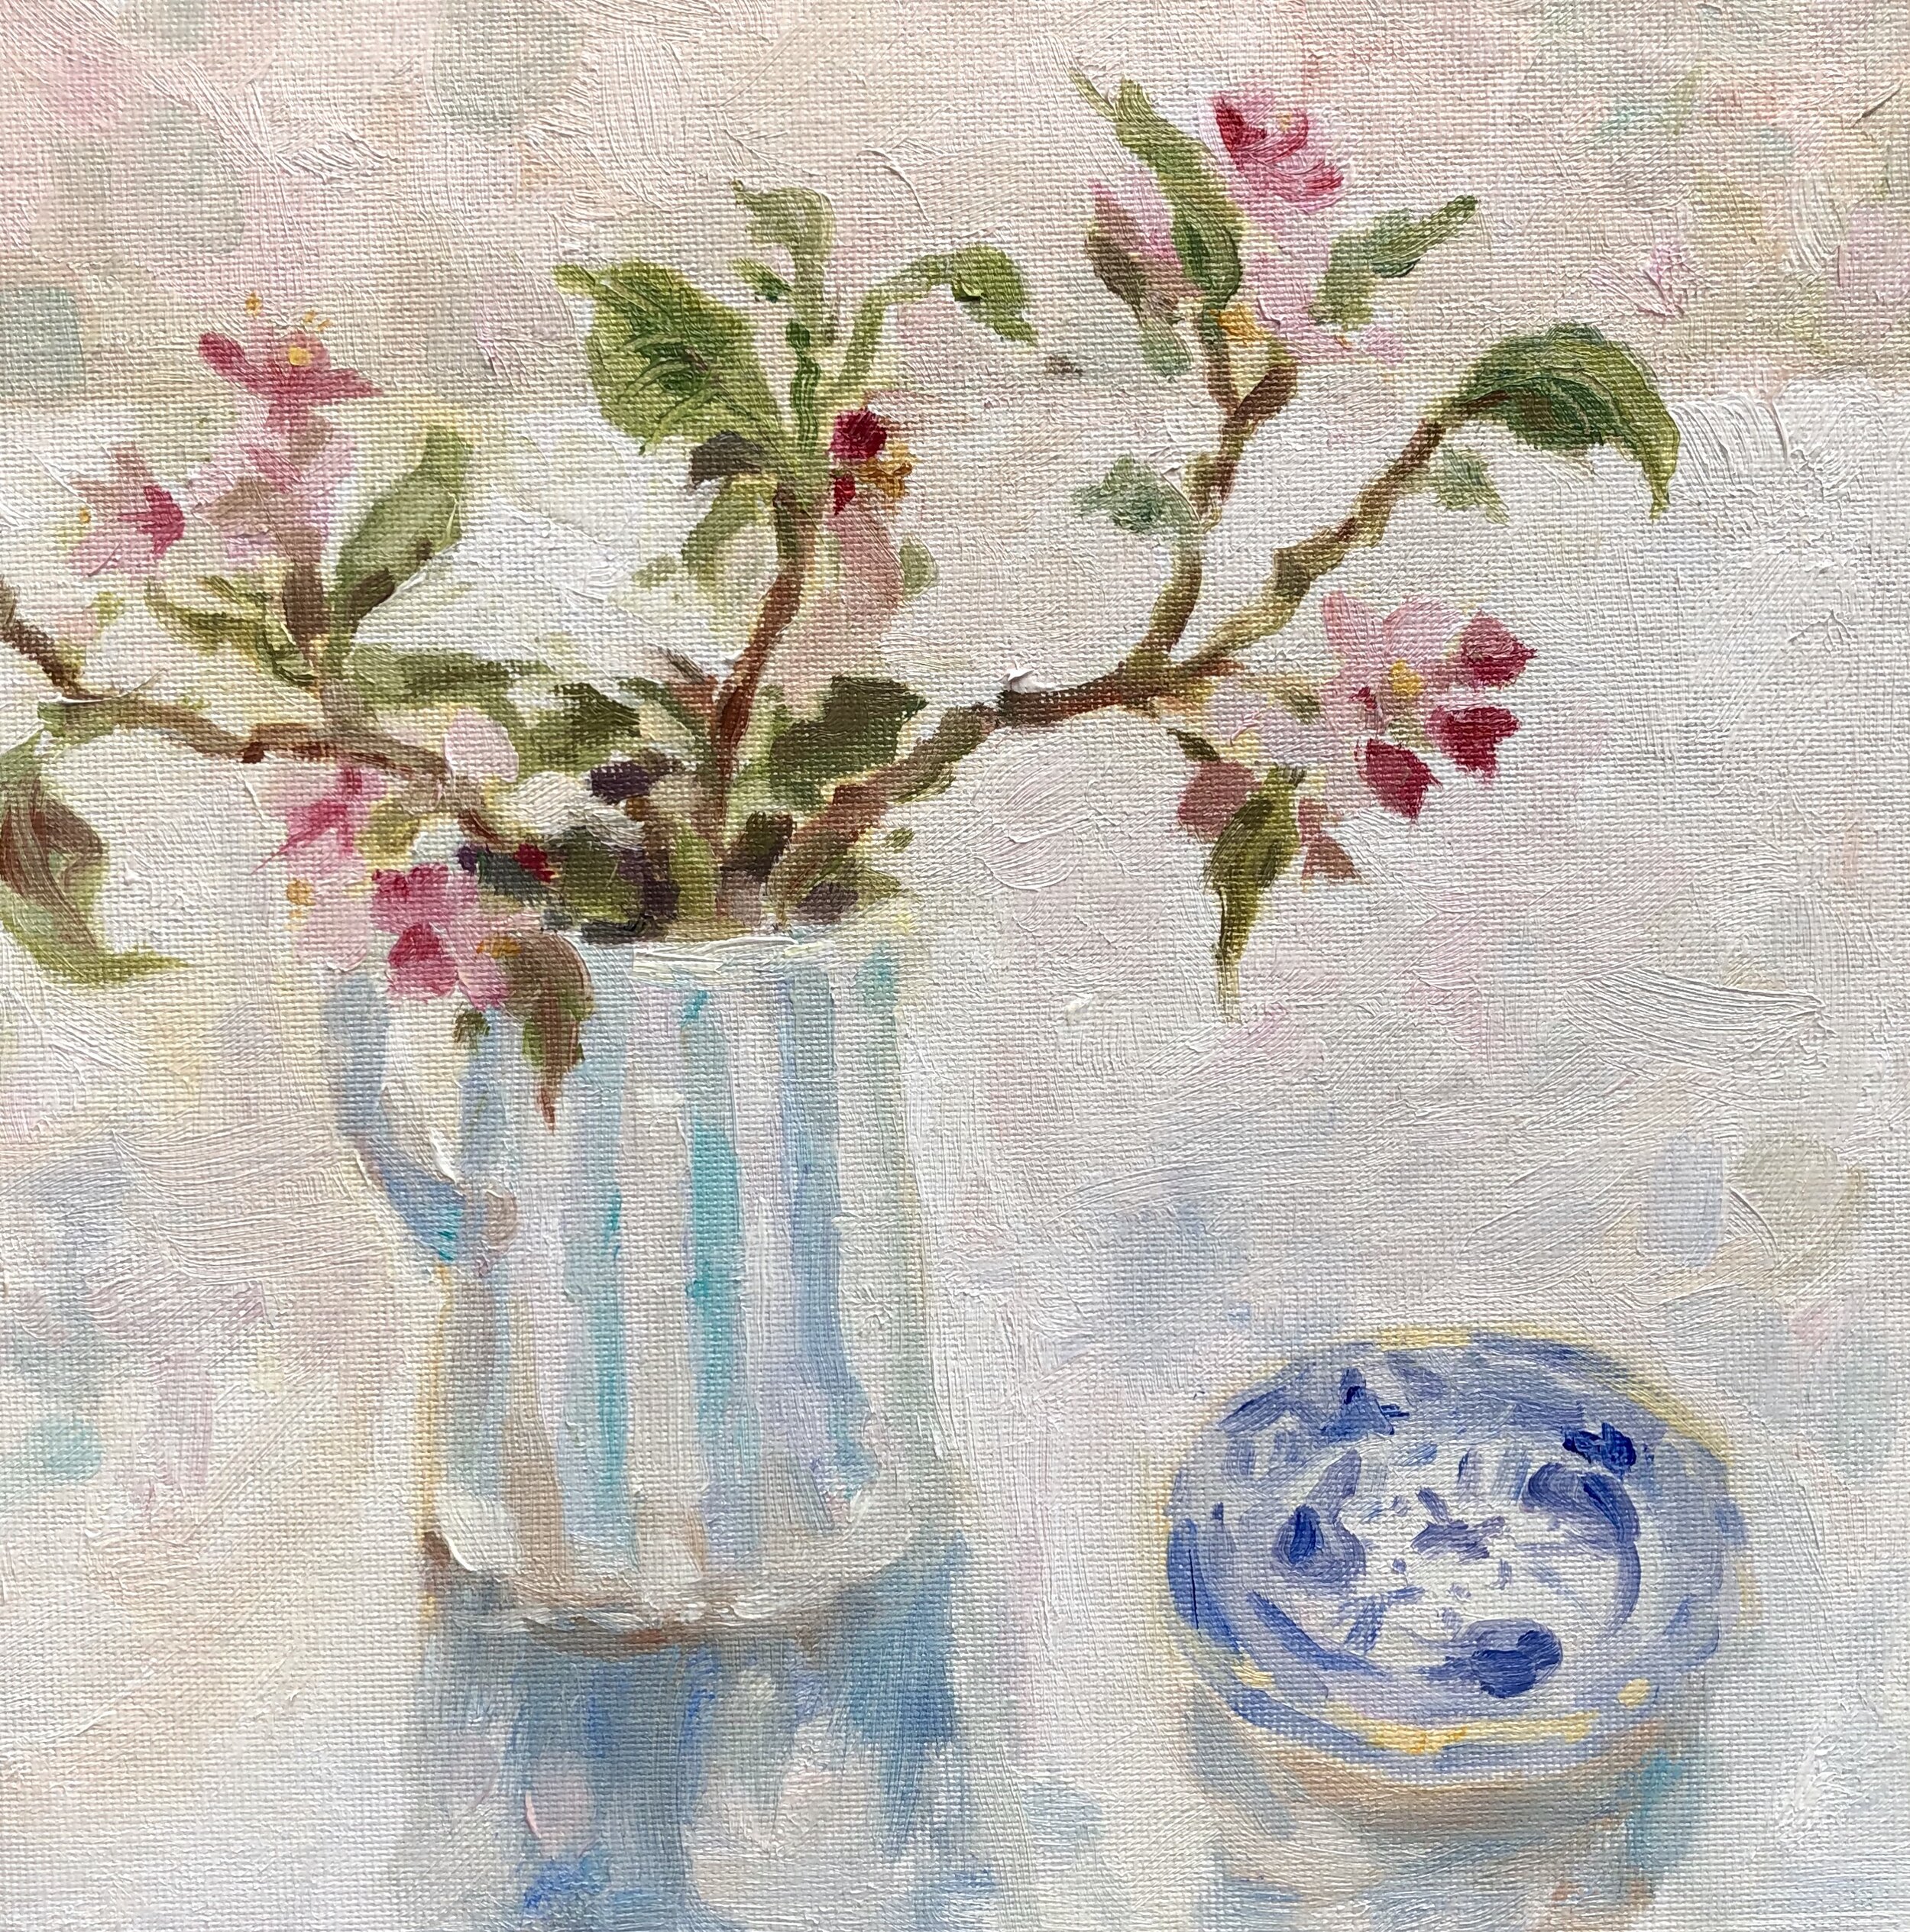 Apple Blossom, 20cm x 20cm, oil on board, sold